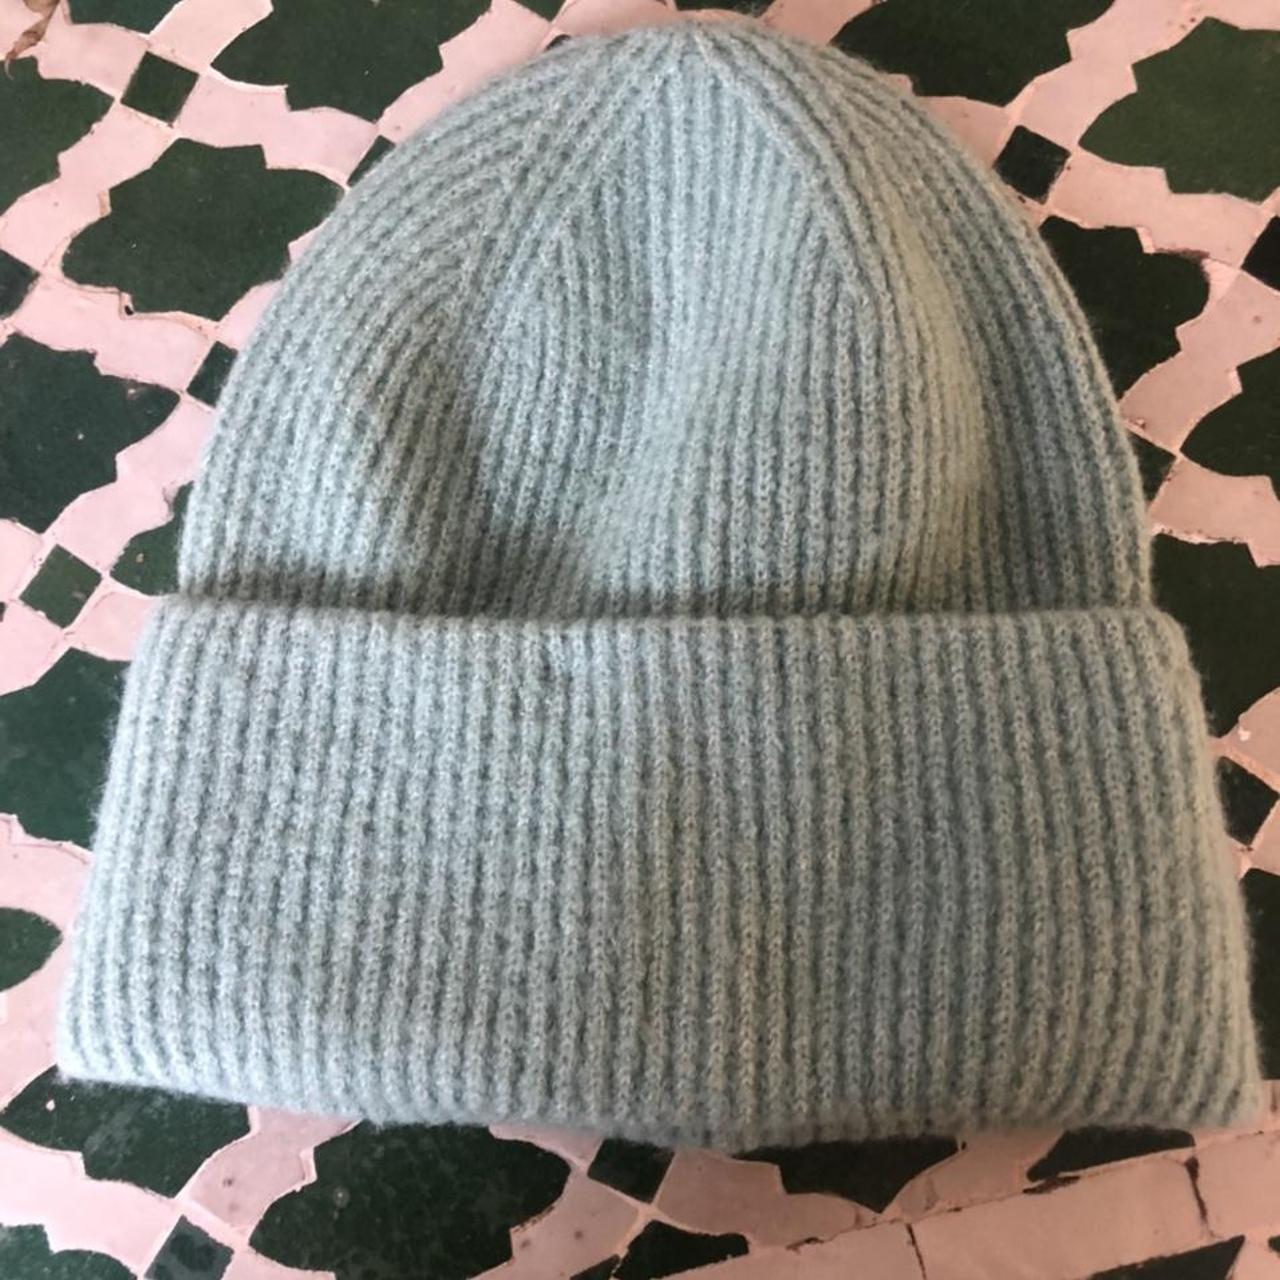 Cool sage coloured beanie - never worn ! Love the... - Depop